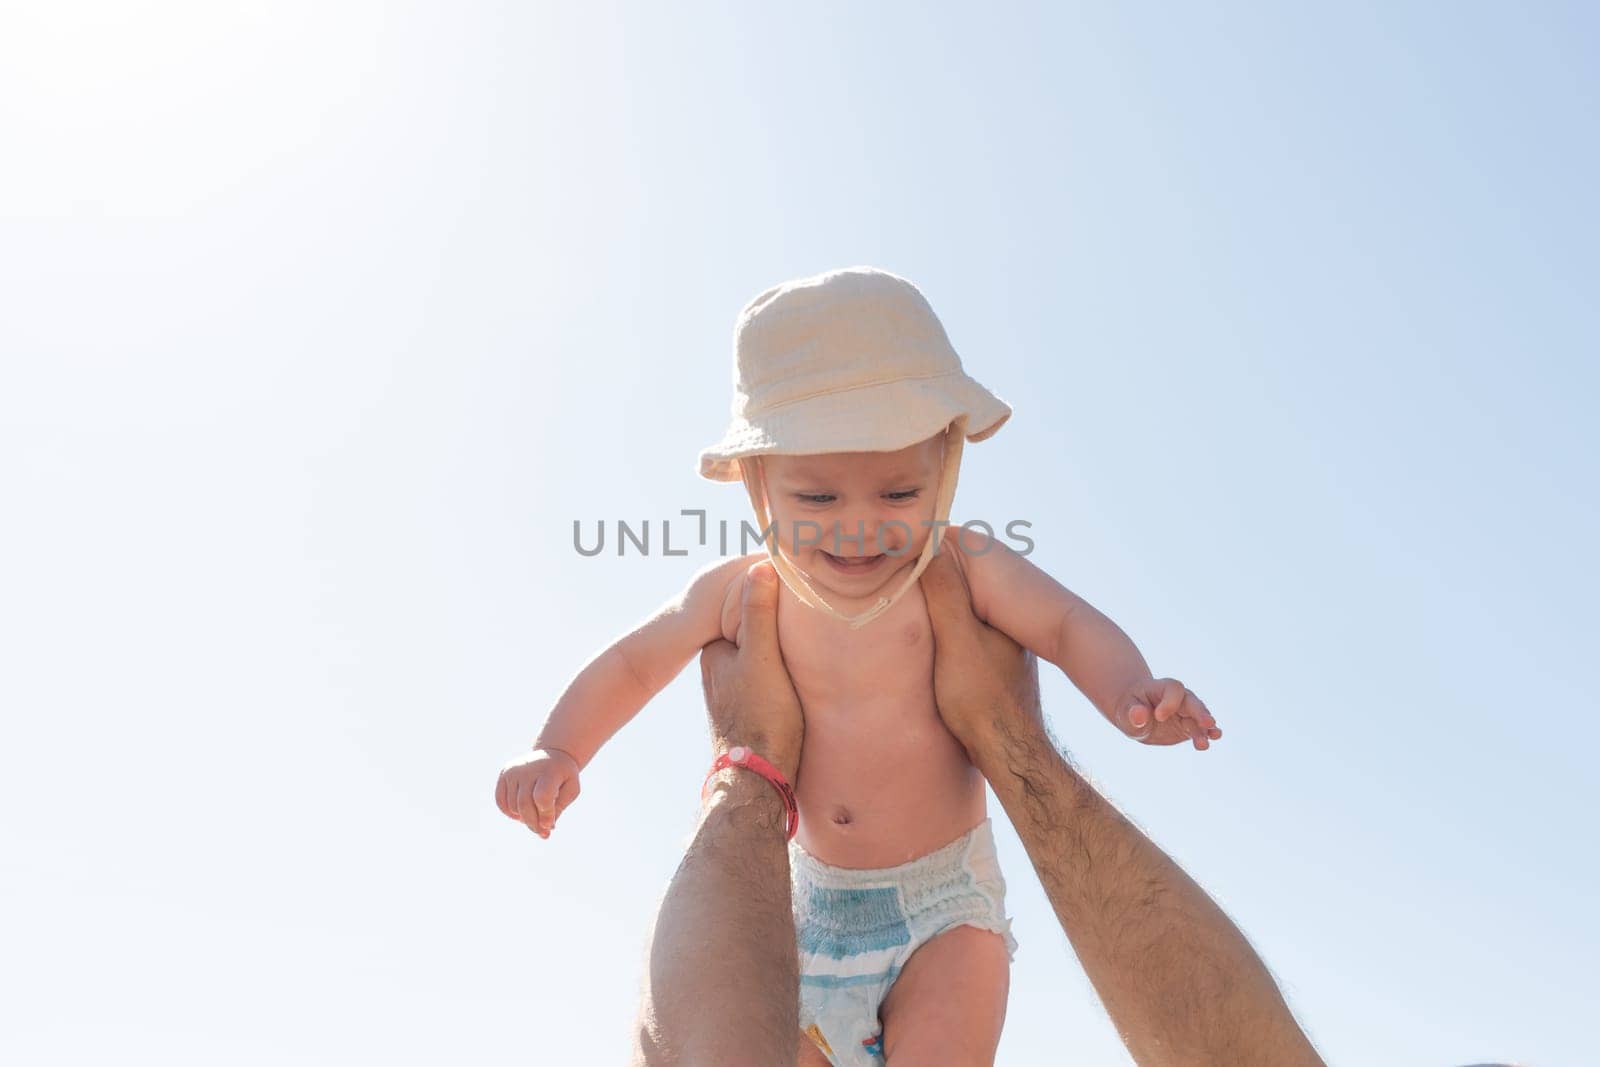 Celebrating a special moment, a father lifts his baby high under a radiant sun, symbolizing nurturing and joy. Concept of early development and playful parenting